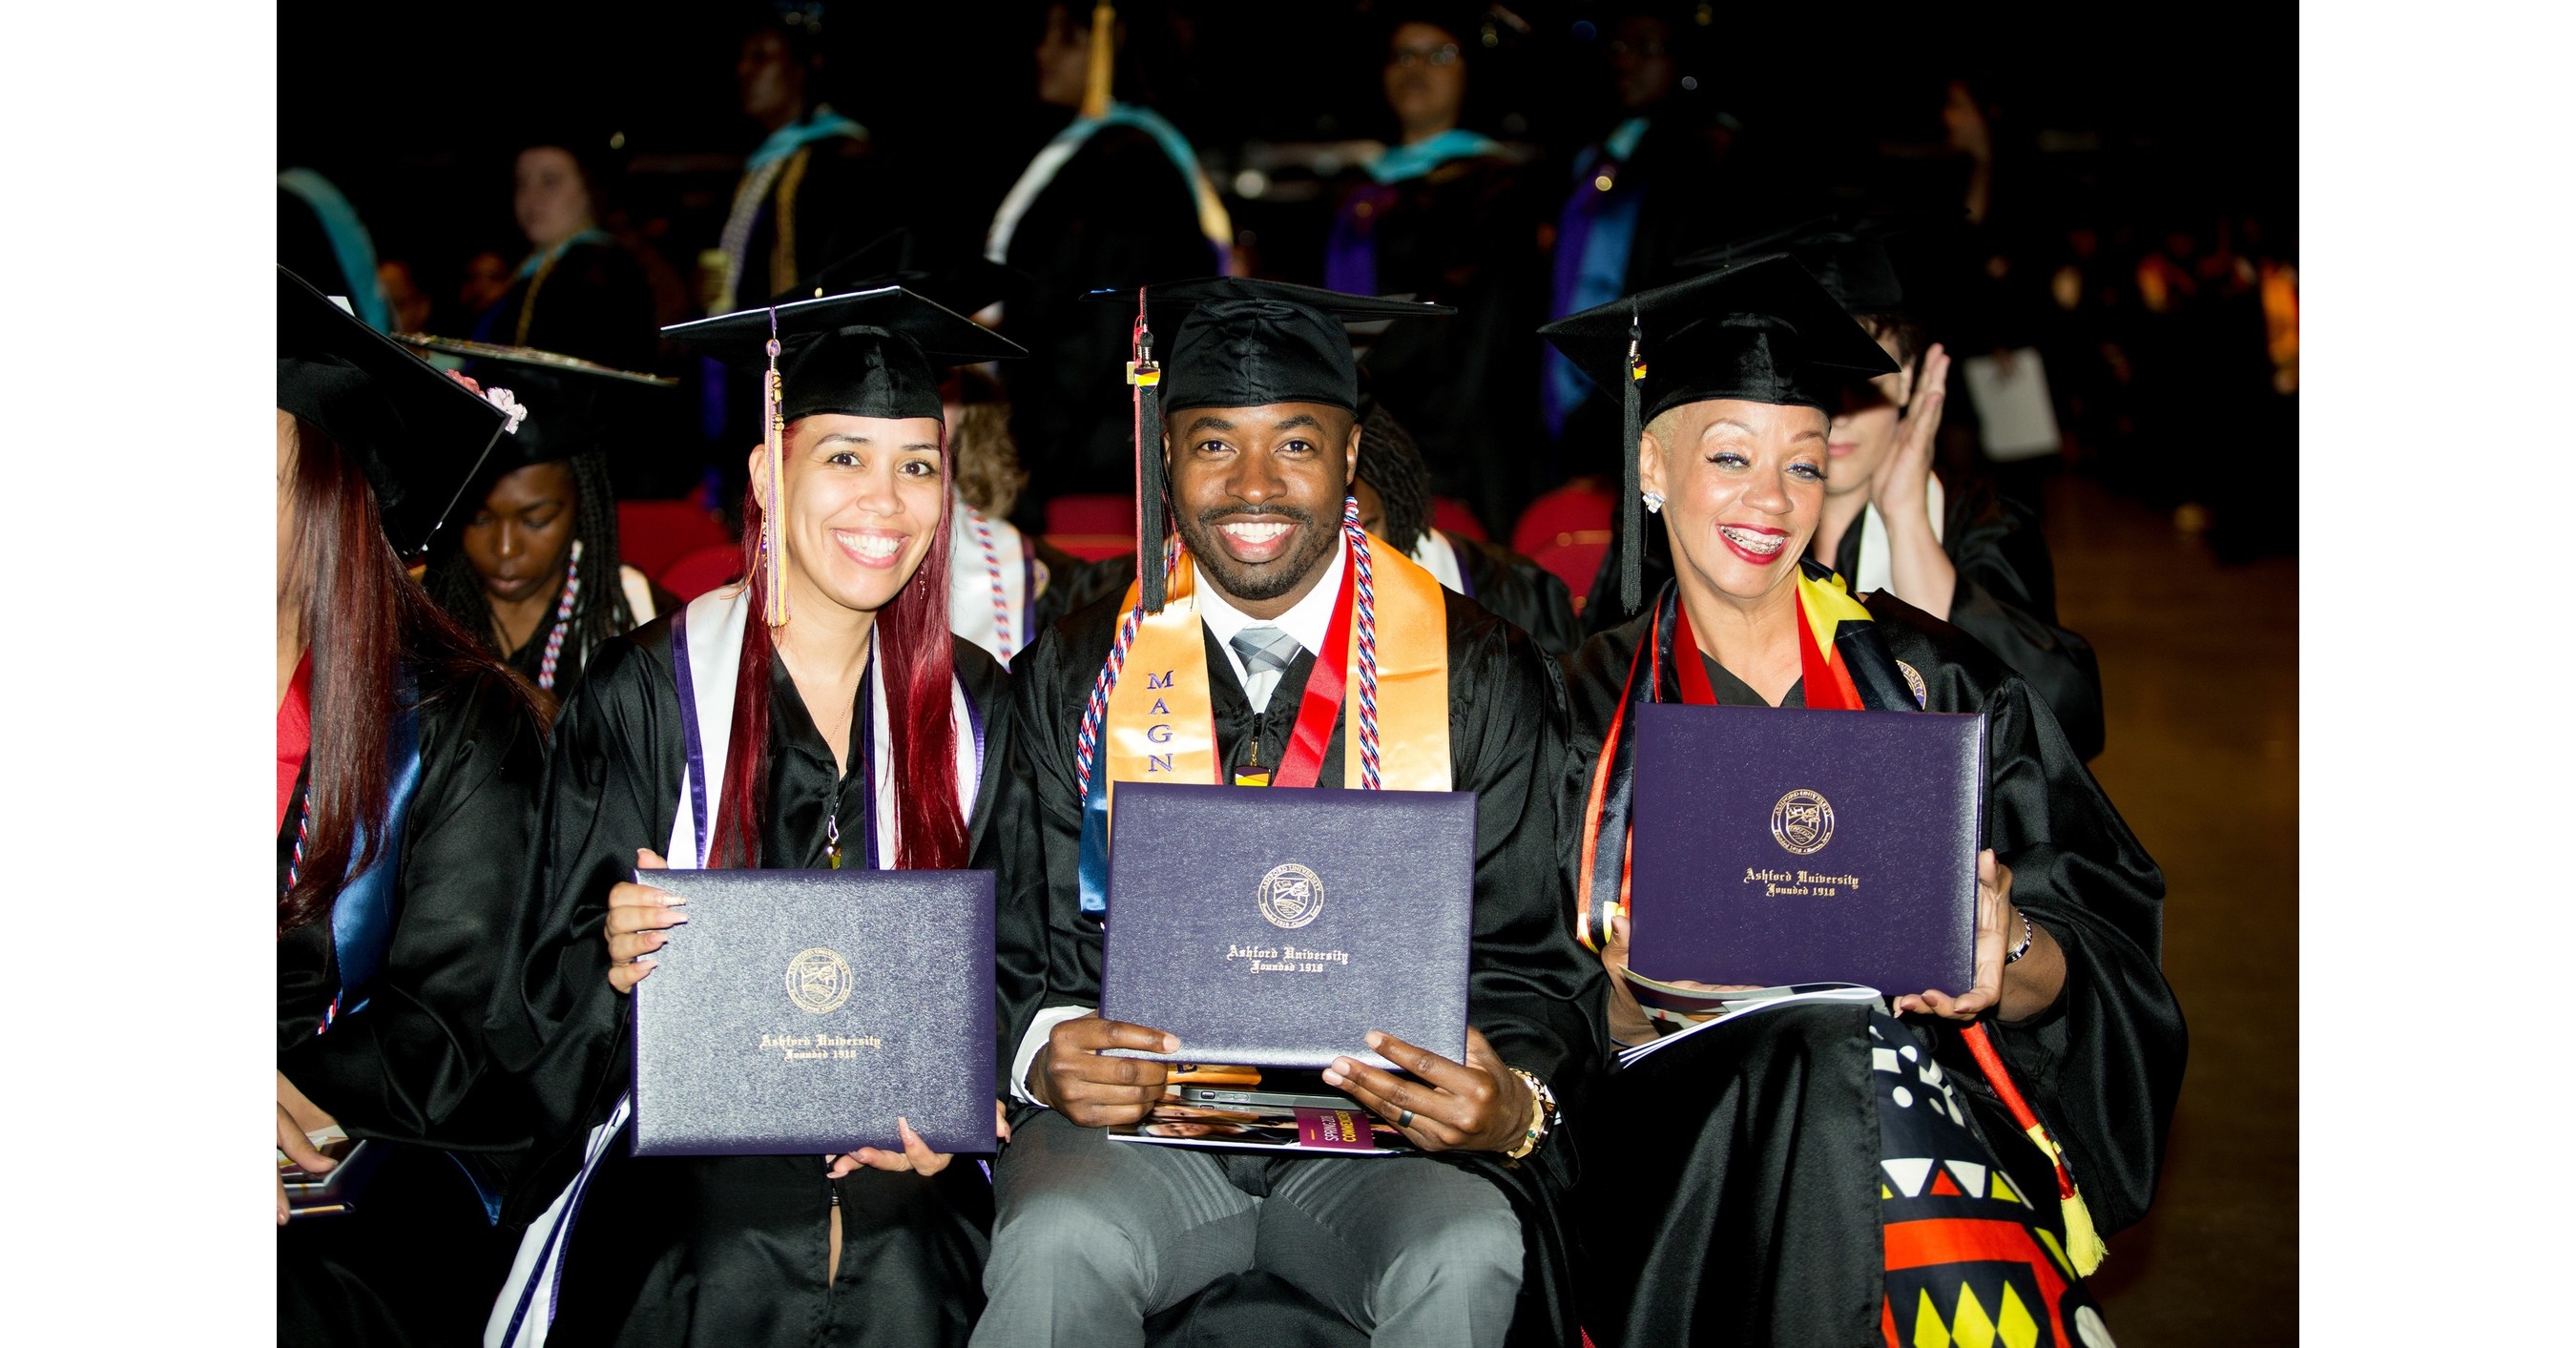 Ashford University's Spring Commencement Ceremony Scheduled for May 5